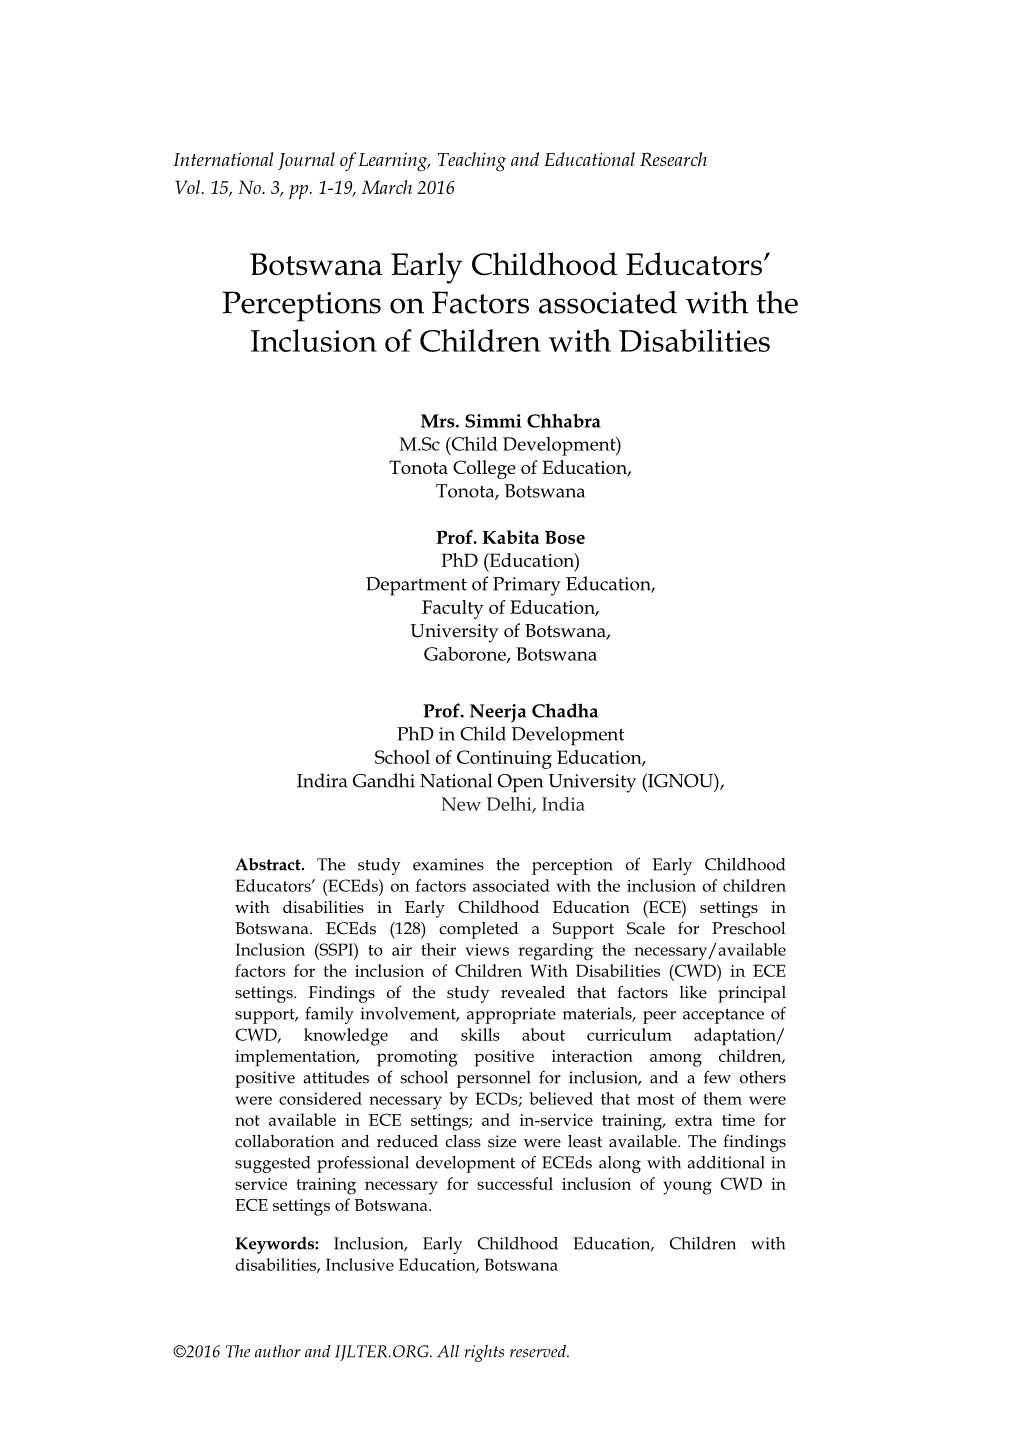 Botswana Early Childhood Educators‟ Perceptions on Factors Associated with the Inclusion of Children with Disabilities